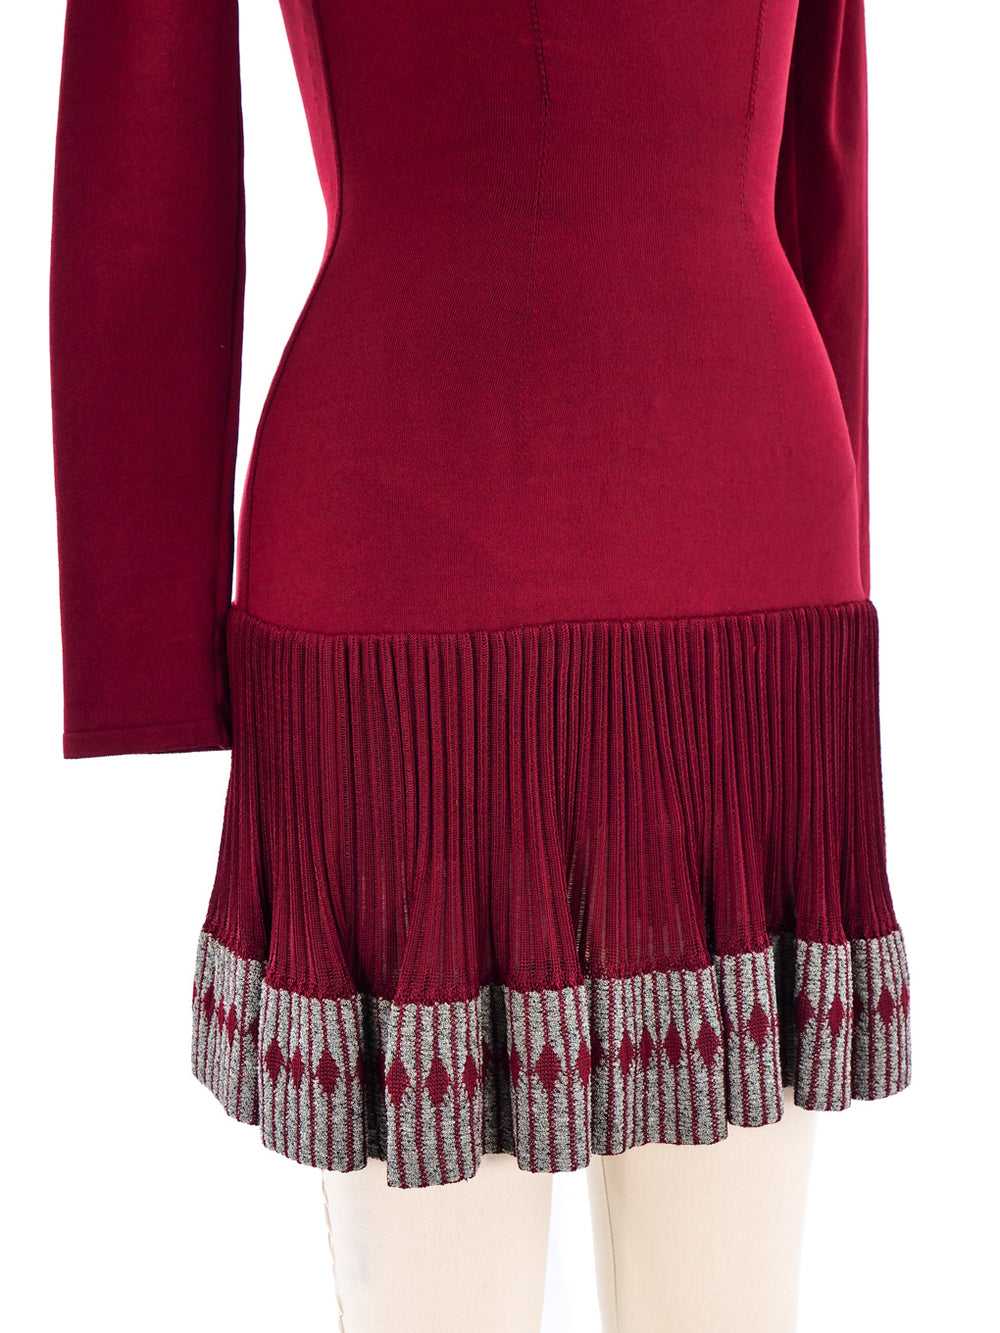 Alaia Cranberry Fit and Flare Ruffle Dress - image 2